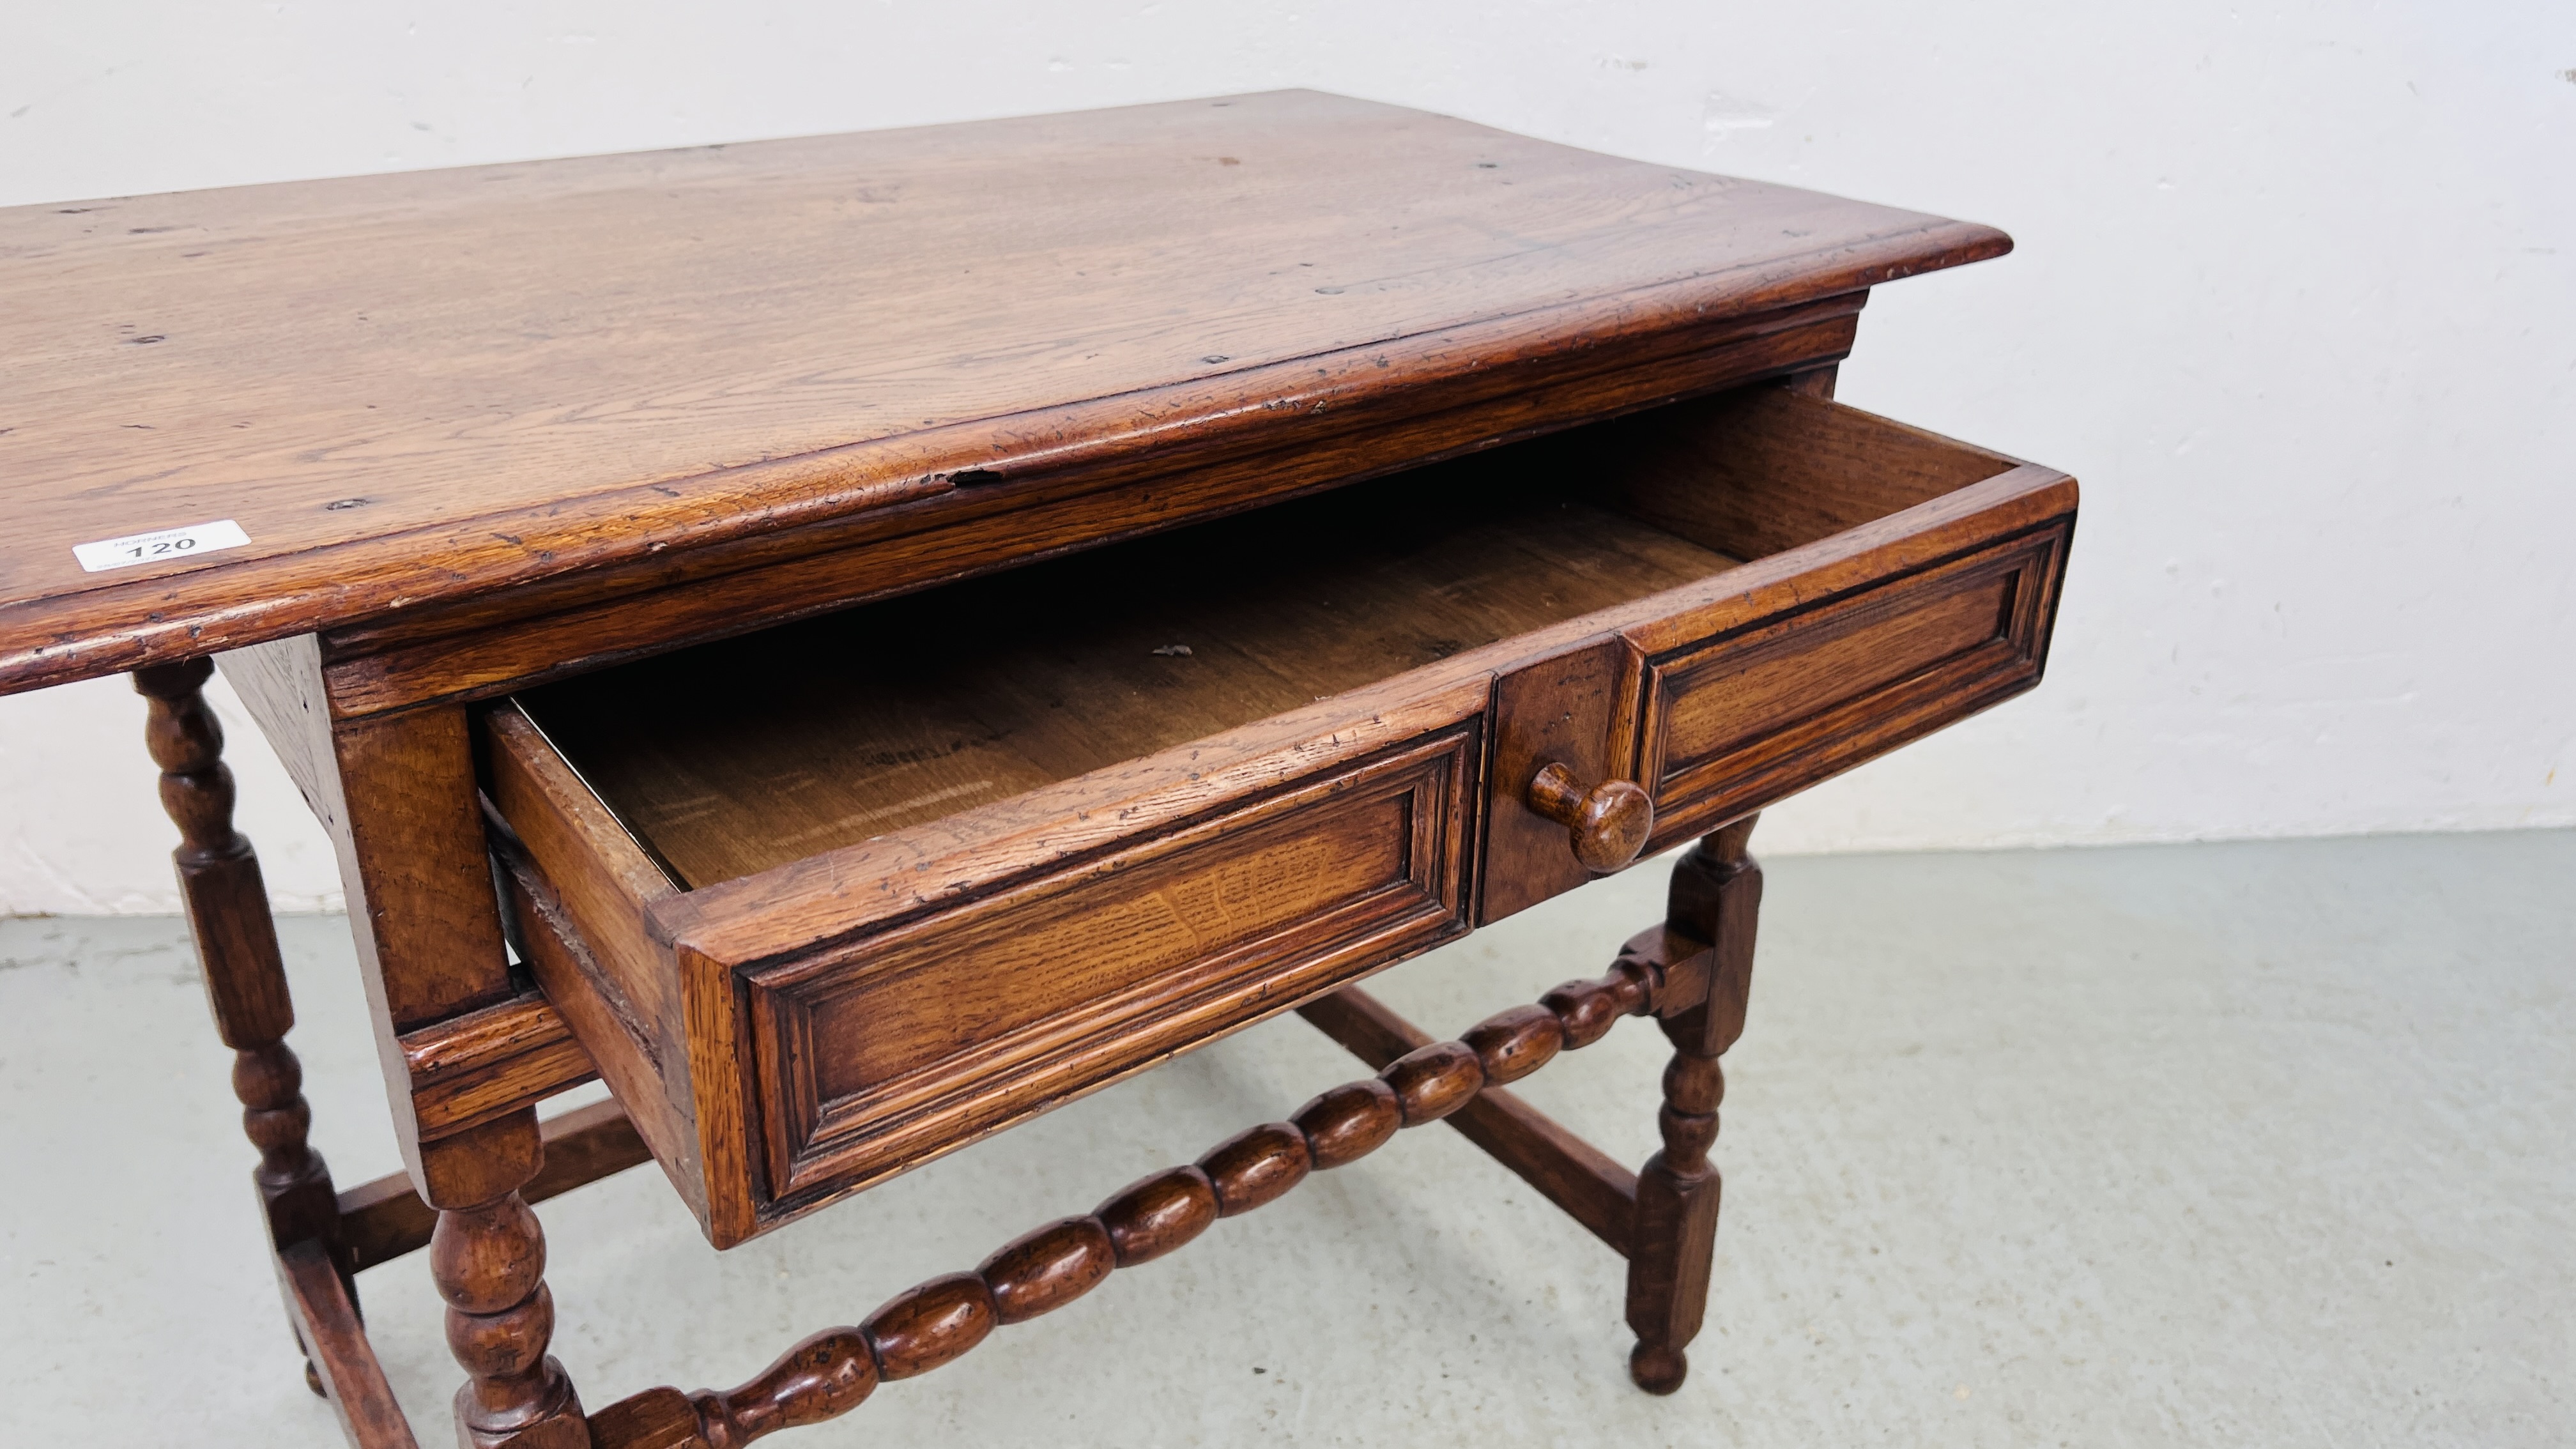 A GOOD QUALITY REPRODUCTION SOLID OAK SINGLE DRAWER SIDE TABLE WITH BOBBIN STRETCHER W 84CM, D 52CM, - Image 7 of 7